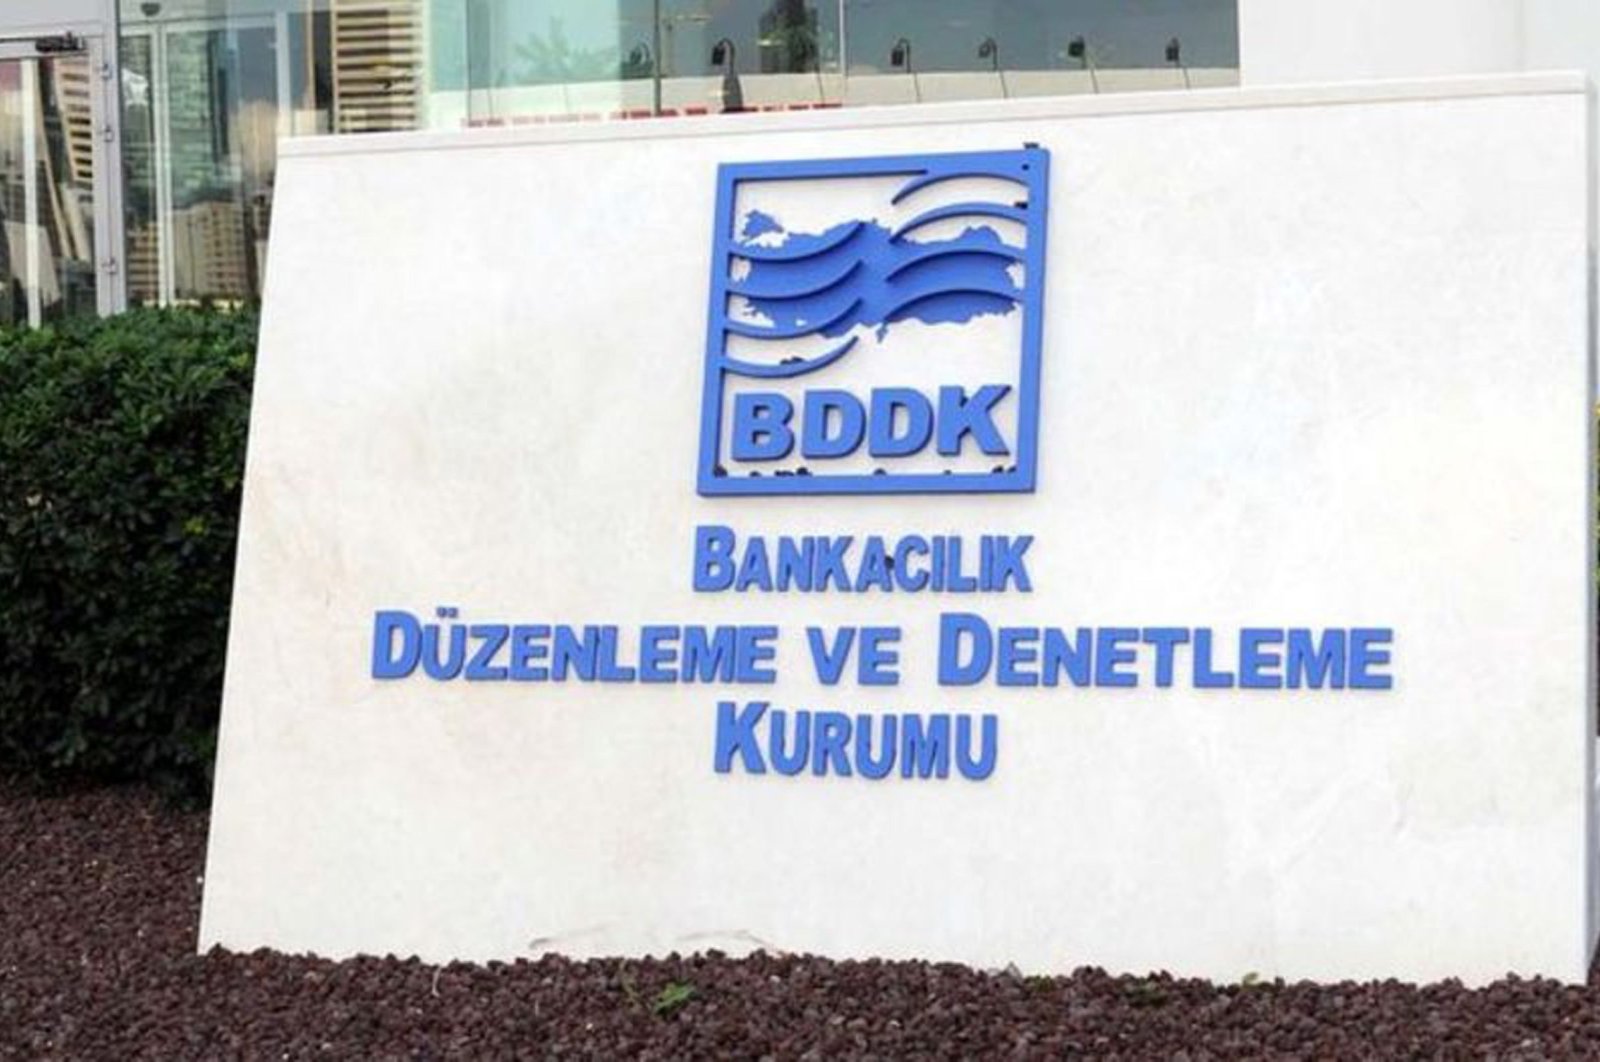 The Banking Regulation and Supervision Agency's (BDDK) logo is seen in front of its headquarters in Istanbul, Turkey, in this undated photo.